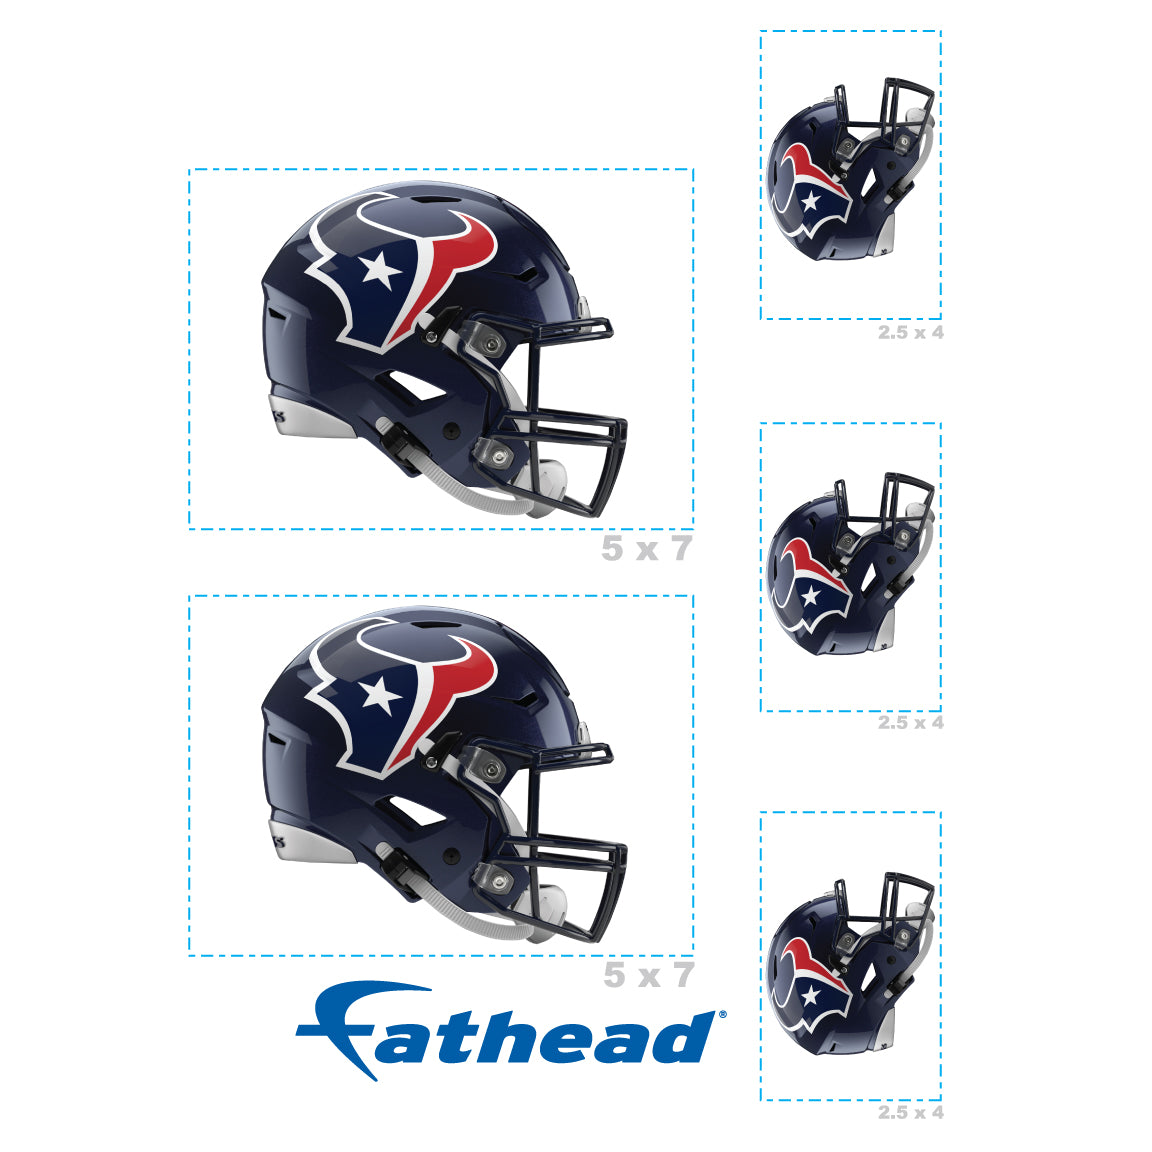 Houston Texans: Helmet Minis - Officially Licensed NFL Removable Adhesive Decal